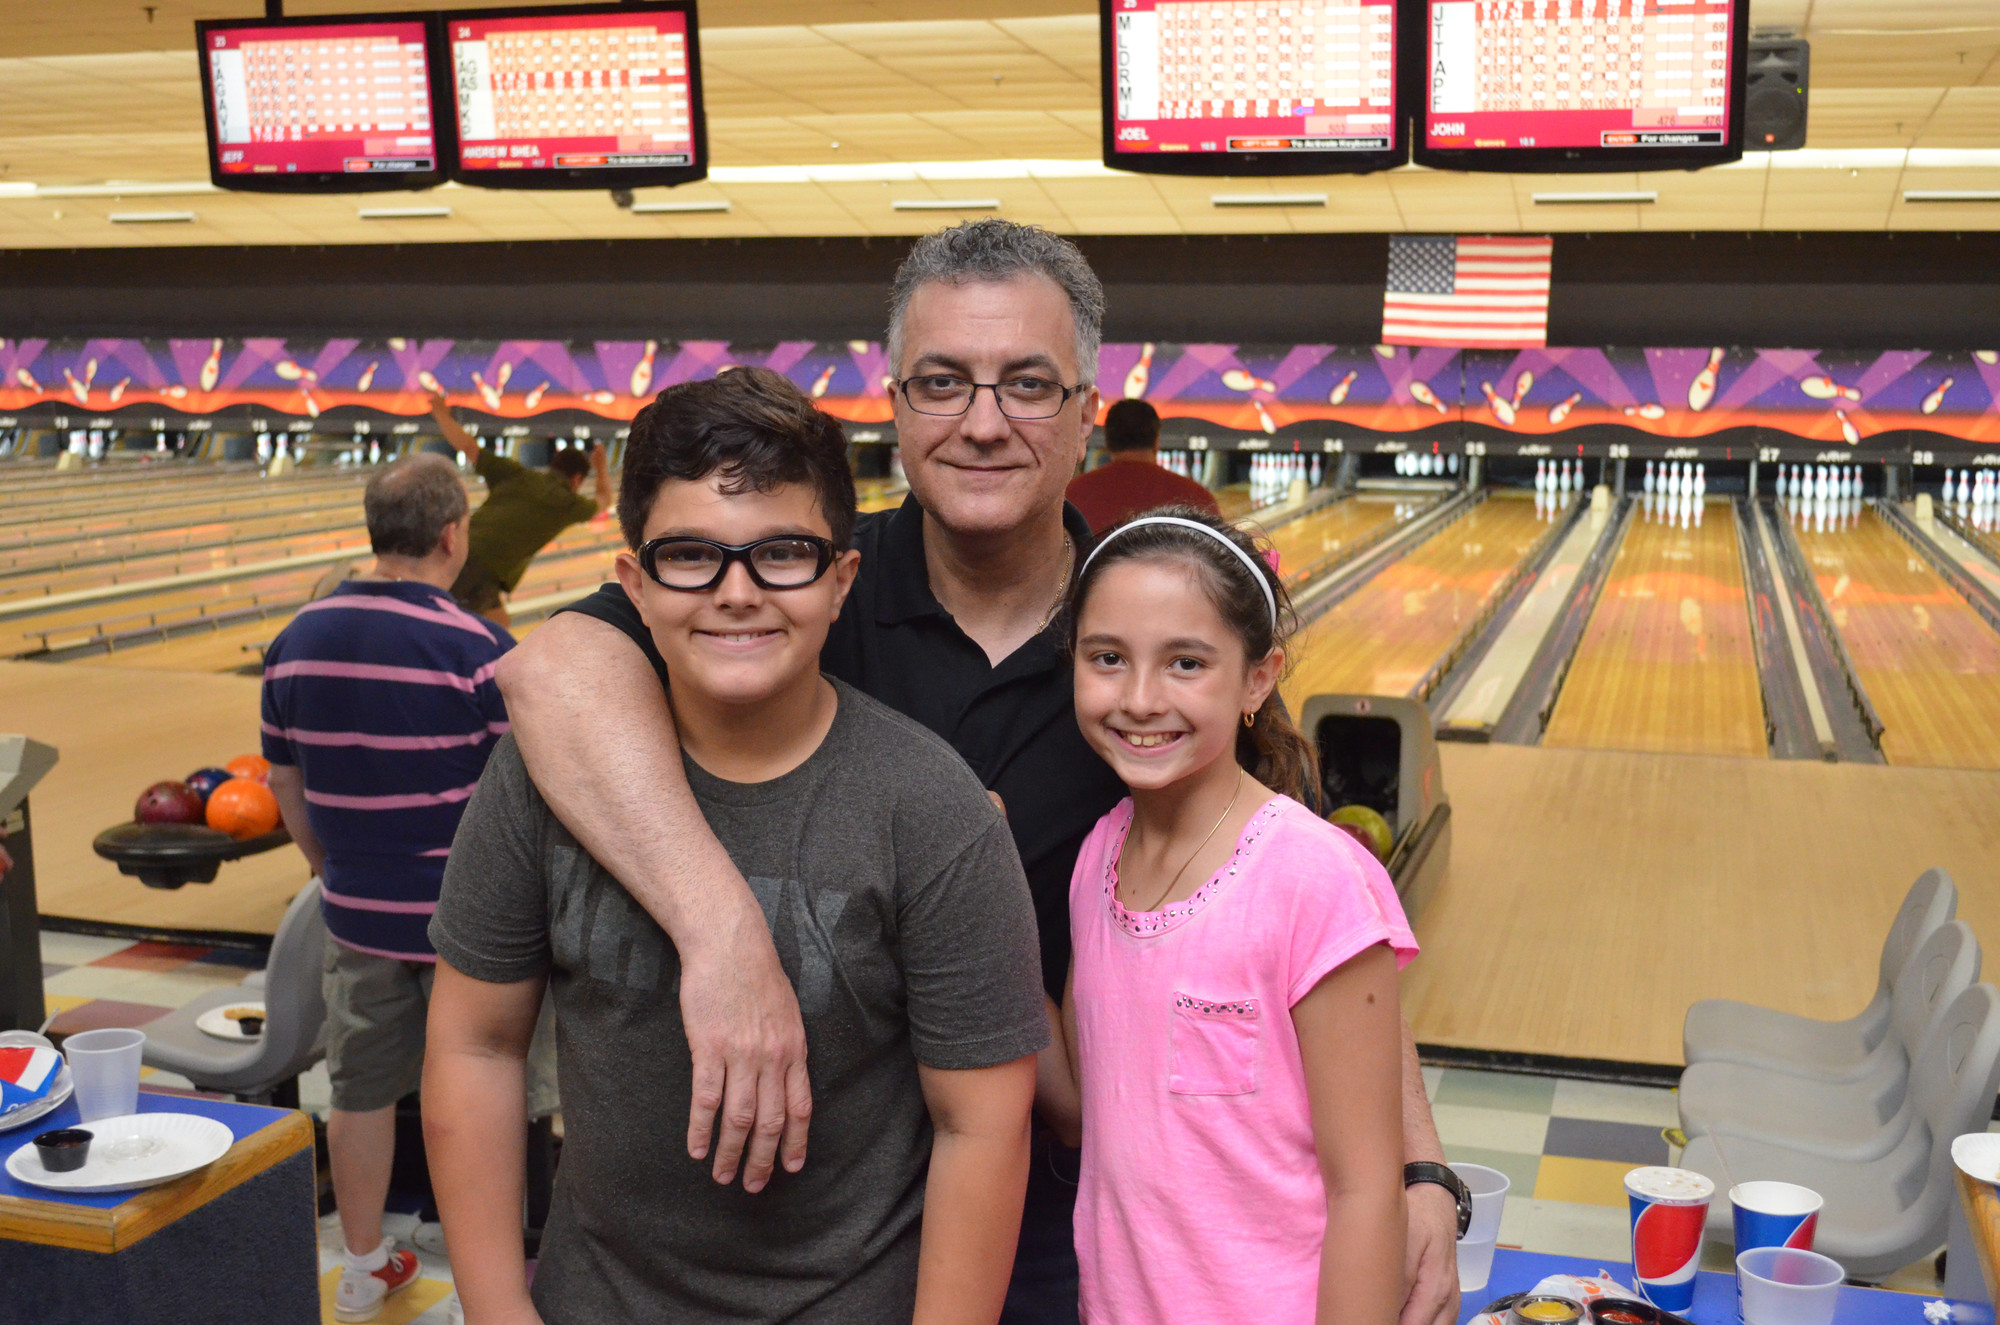 It was a happy father’s day for Peter Strifas, who smiled with his daughter, Taylor, 9, and son, John, 10.